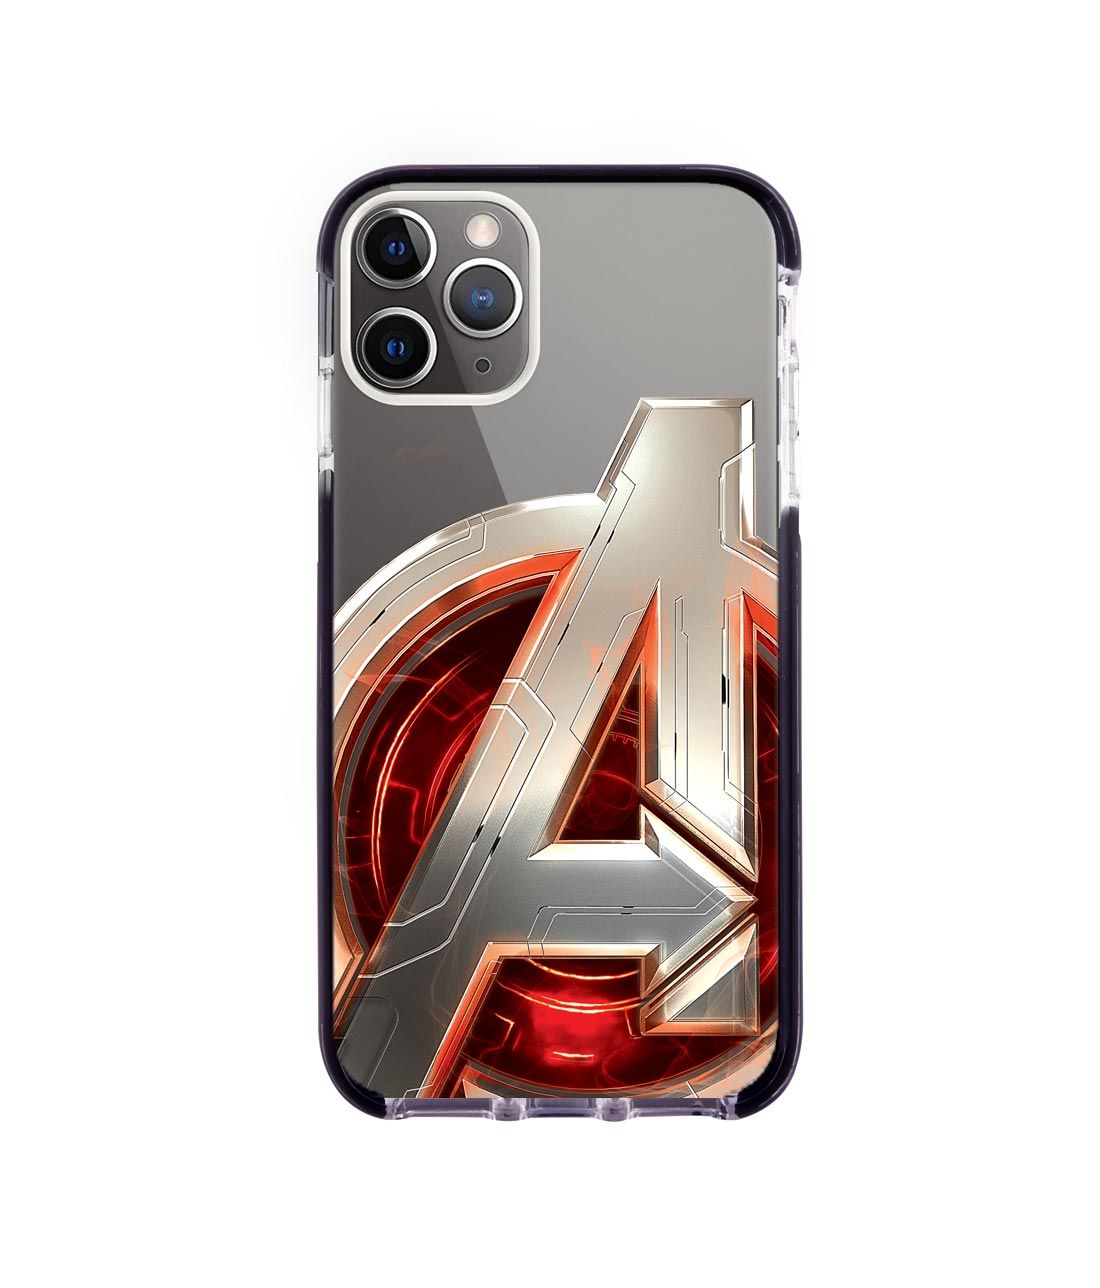 Avengers Version 2 - Extreme Phone Case for iPhone 11 Pro